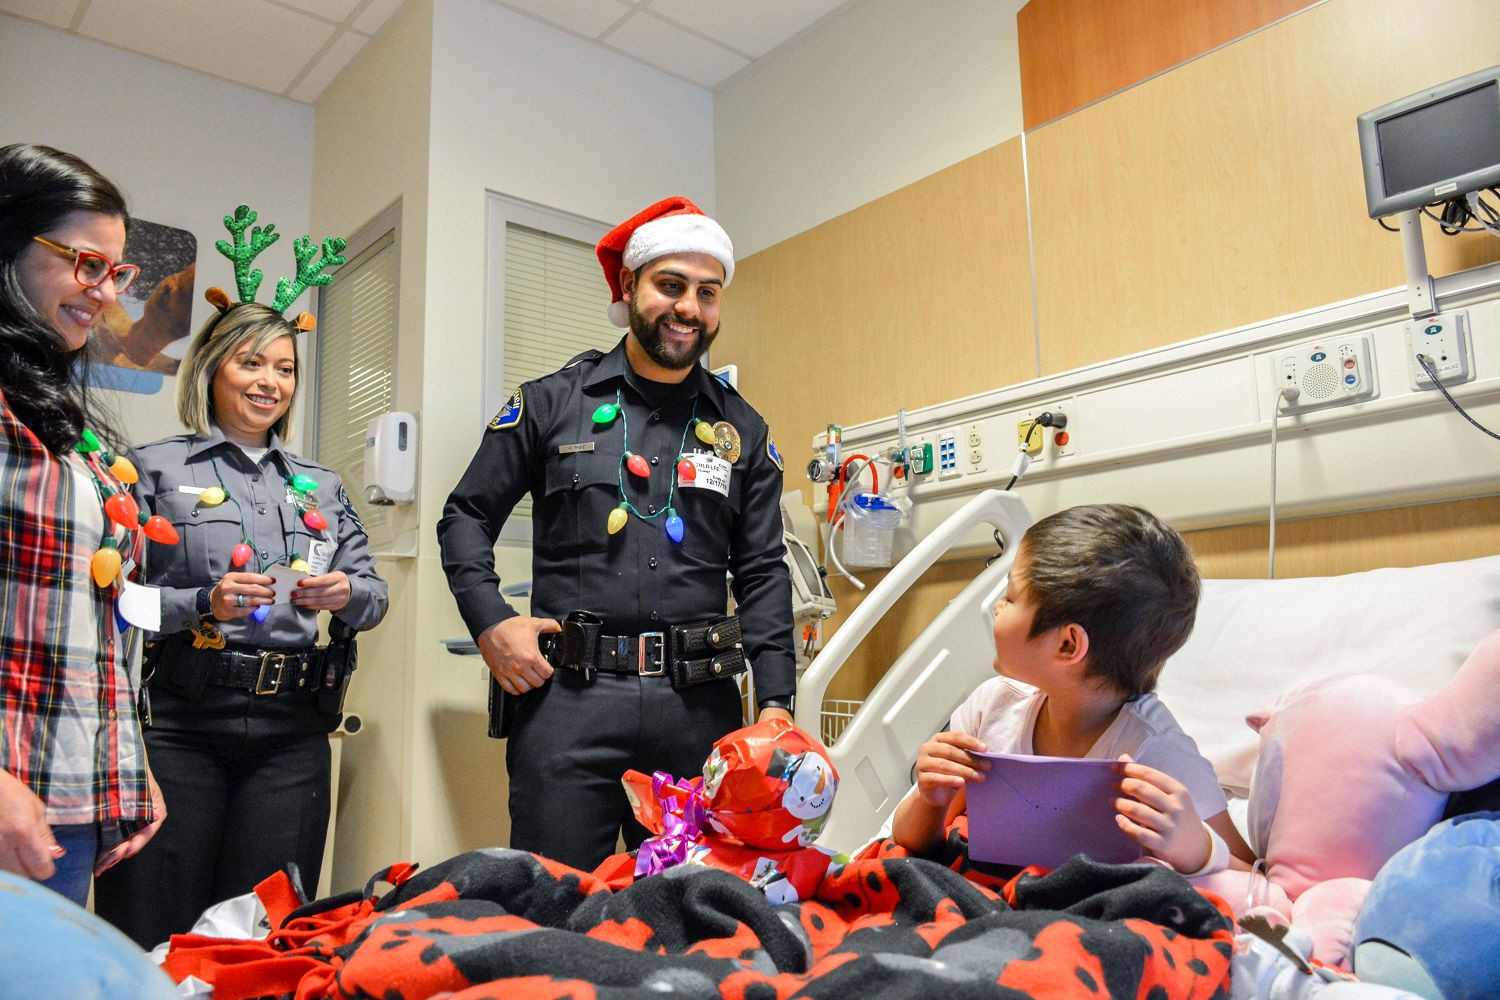 Police officers and a volunteer smile at a child opening a present in a hospital room